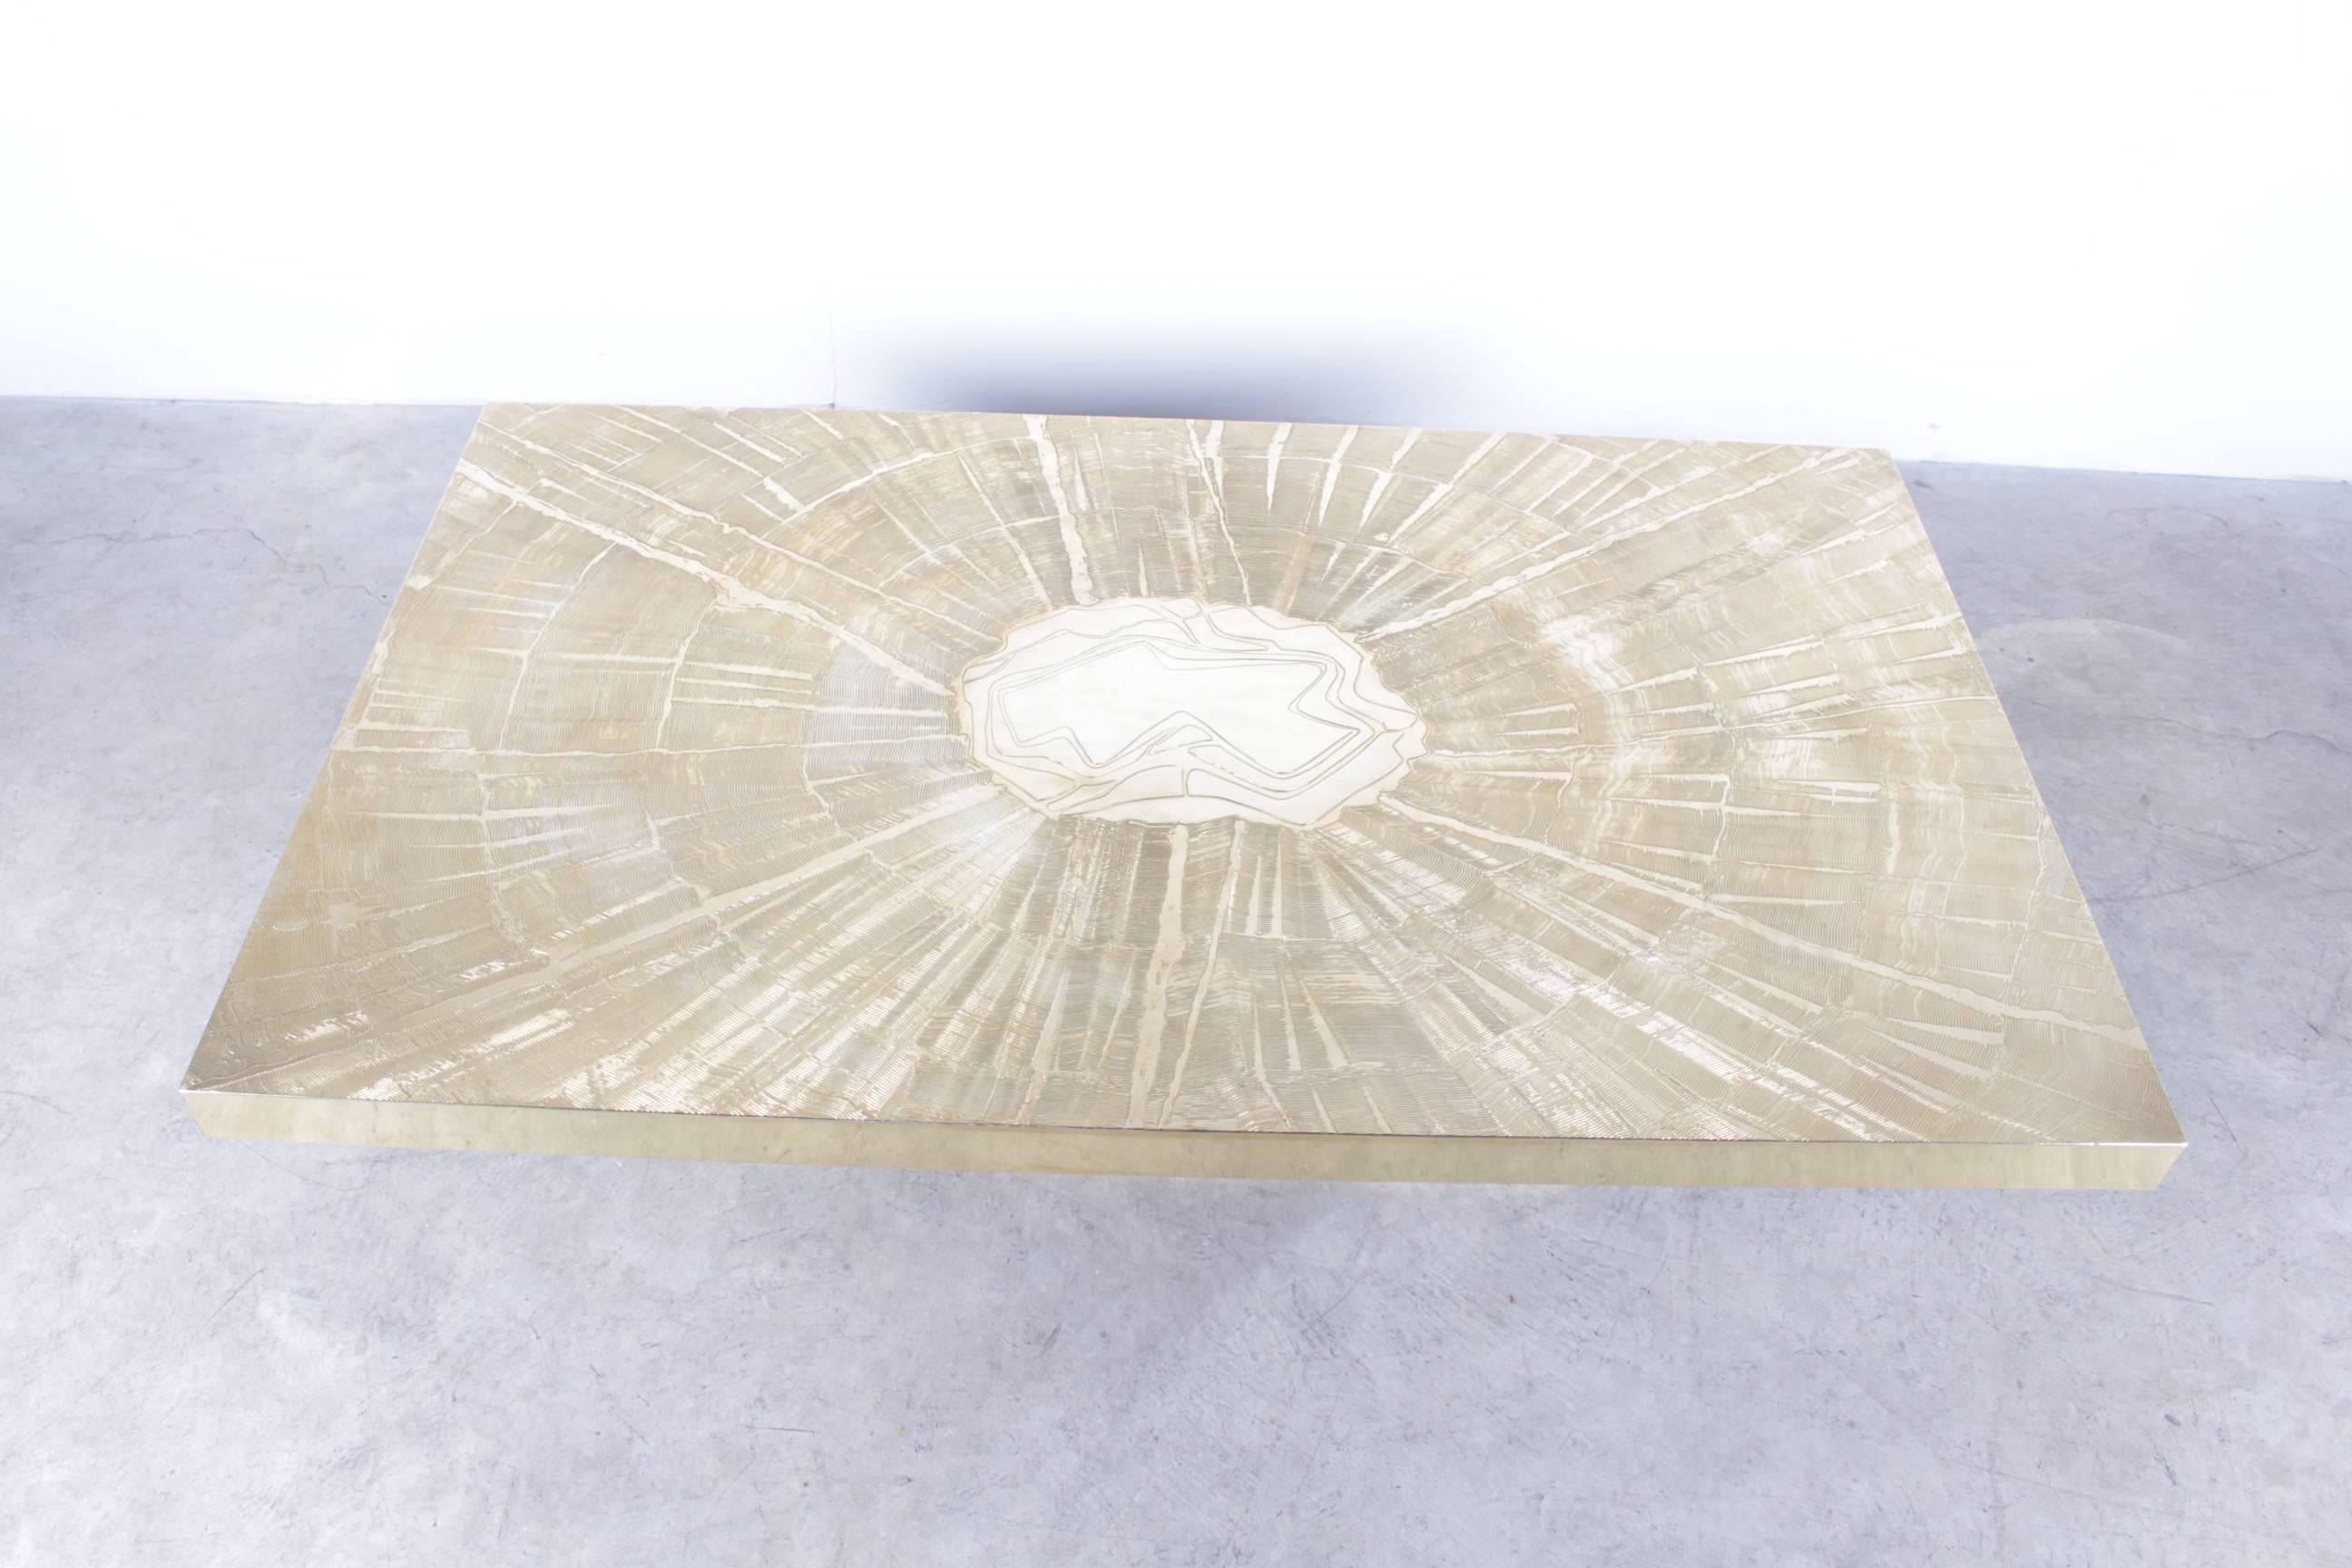 Splendid coffee table signed by A. Verneuil, in very good condition.
The white reflect are due to the camera flash, very thin scratches on the center and a very small bump on a border, due to normal wear, see pictures.
This coffee table is